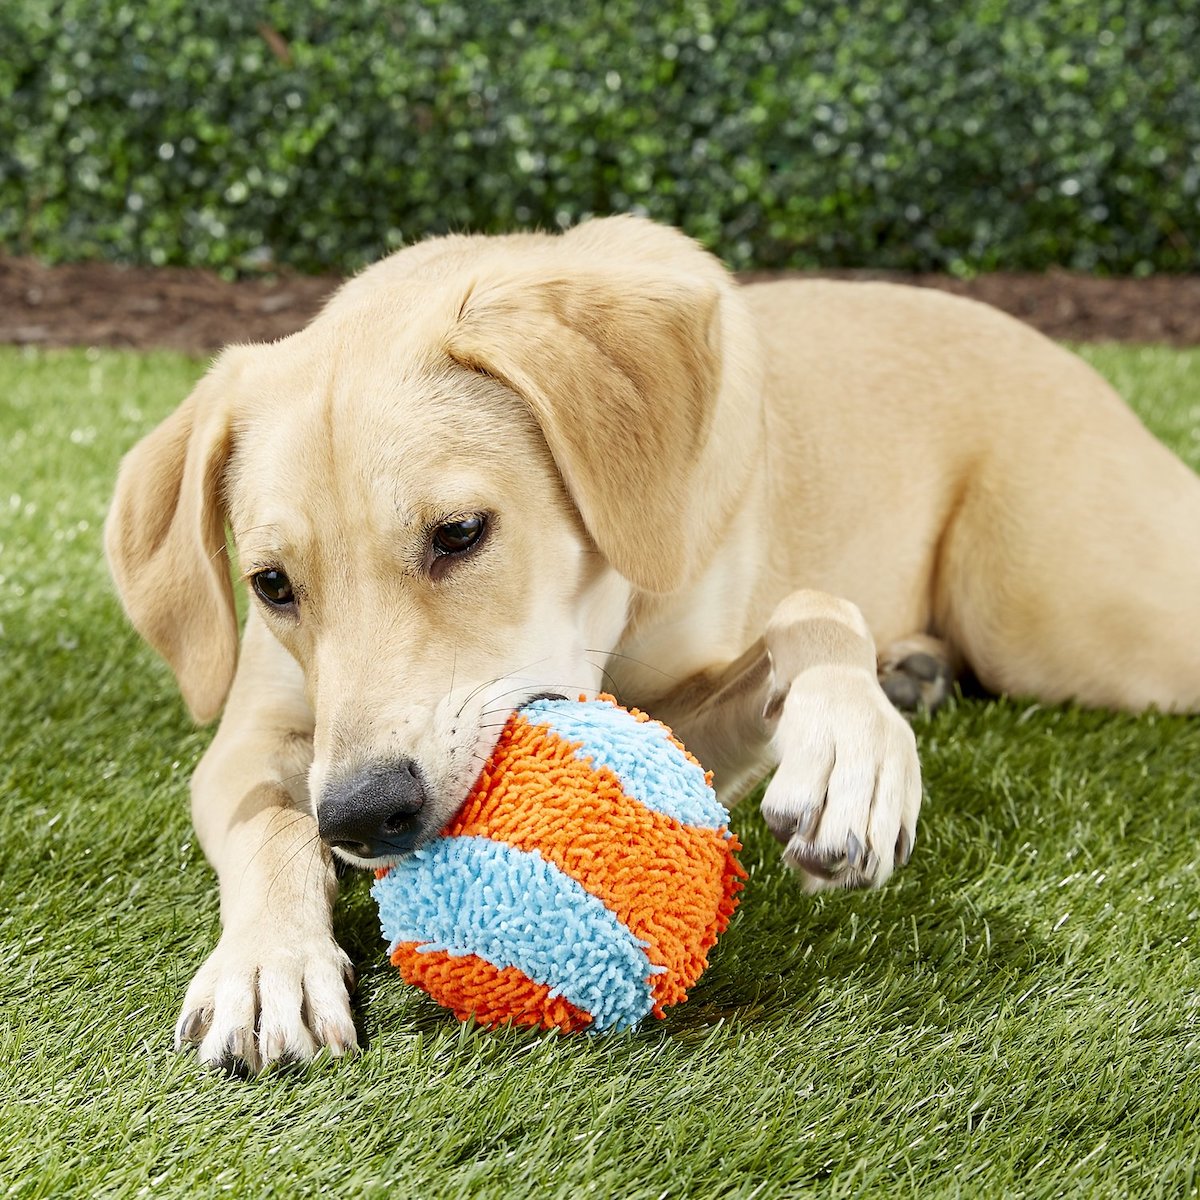 17 Dog Toys That Reviewers and Their Dogs Love